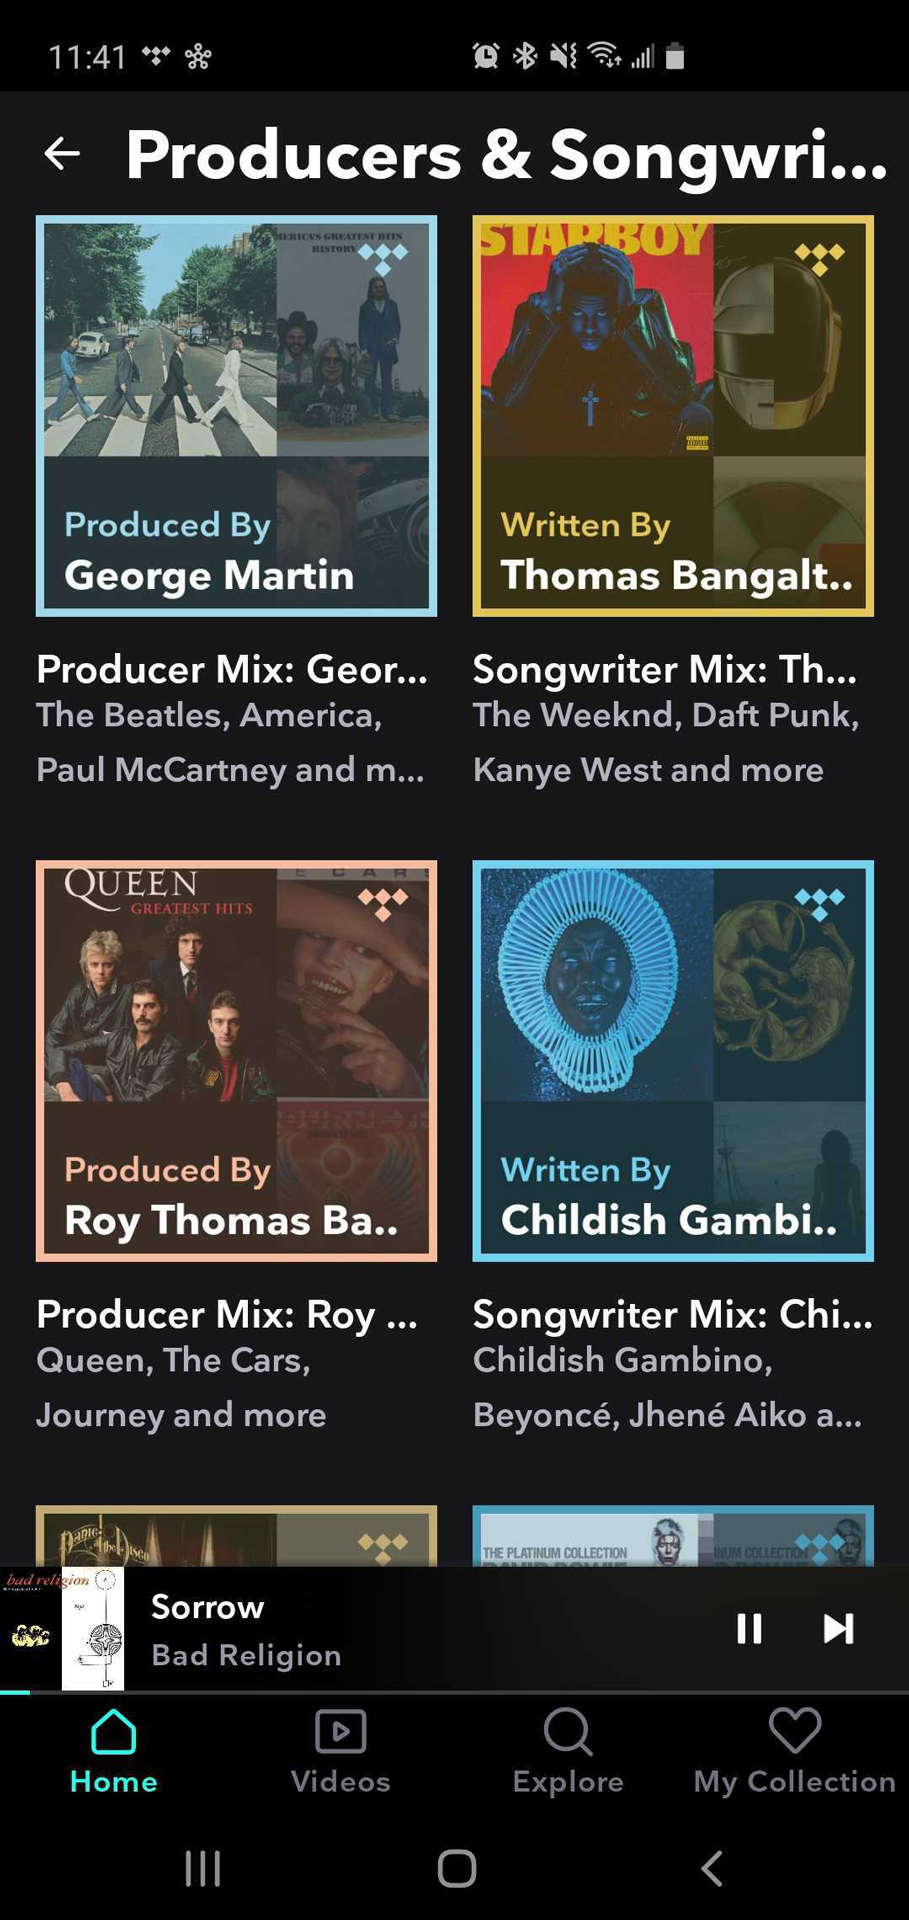 A screenshot of the Tidal Producers & Songwriters automatic playlist selection screen used to illustrate the differences between Tidal vs Spotify.